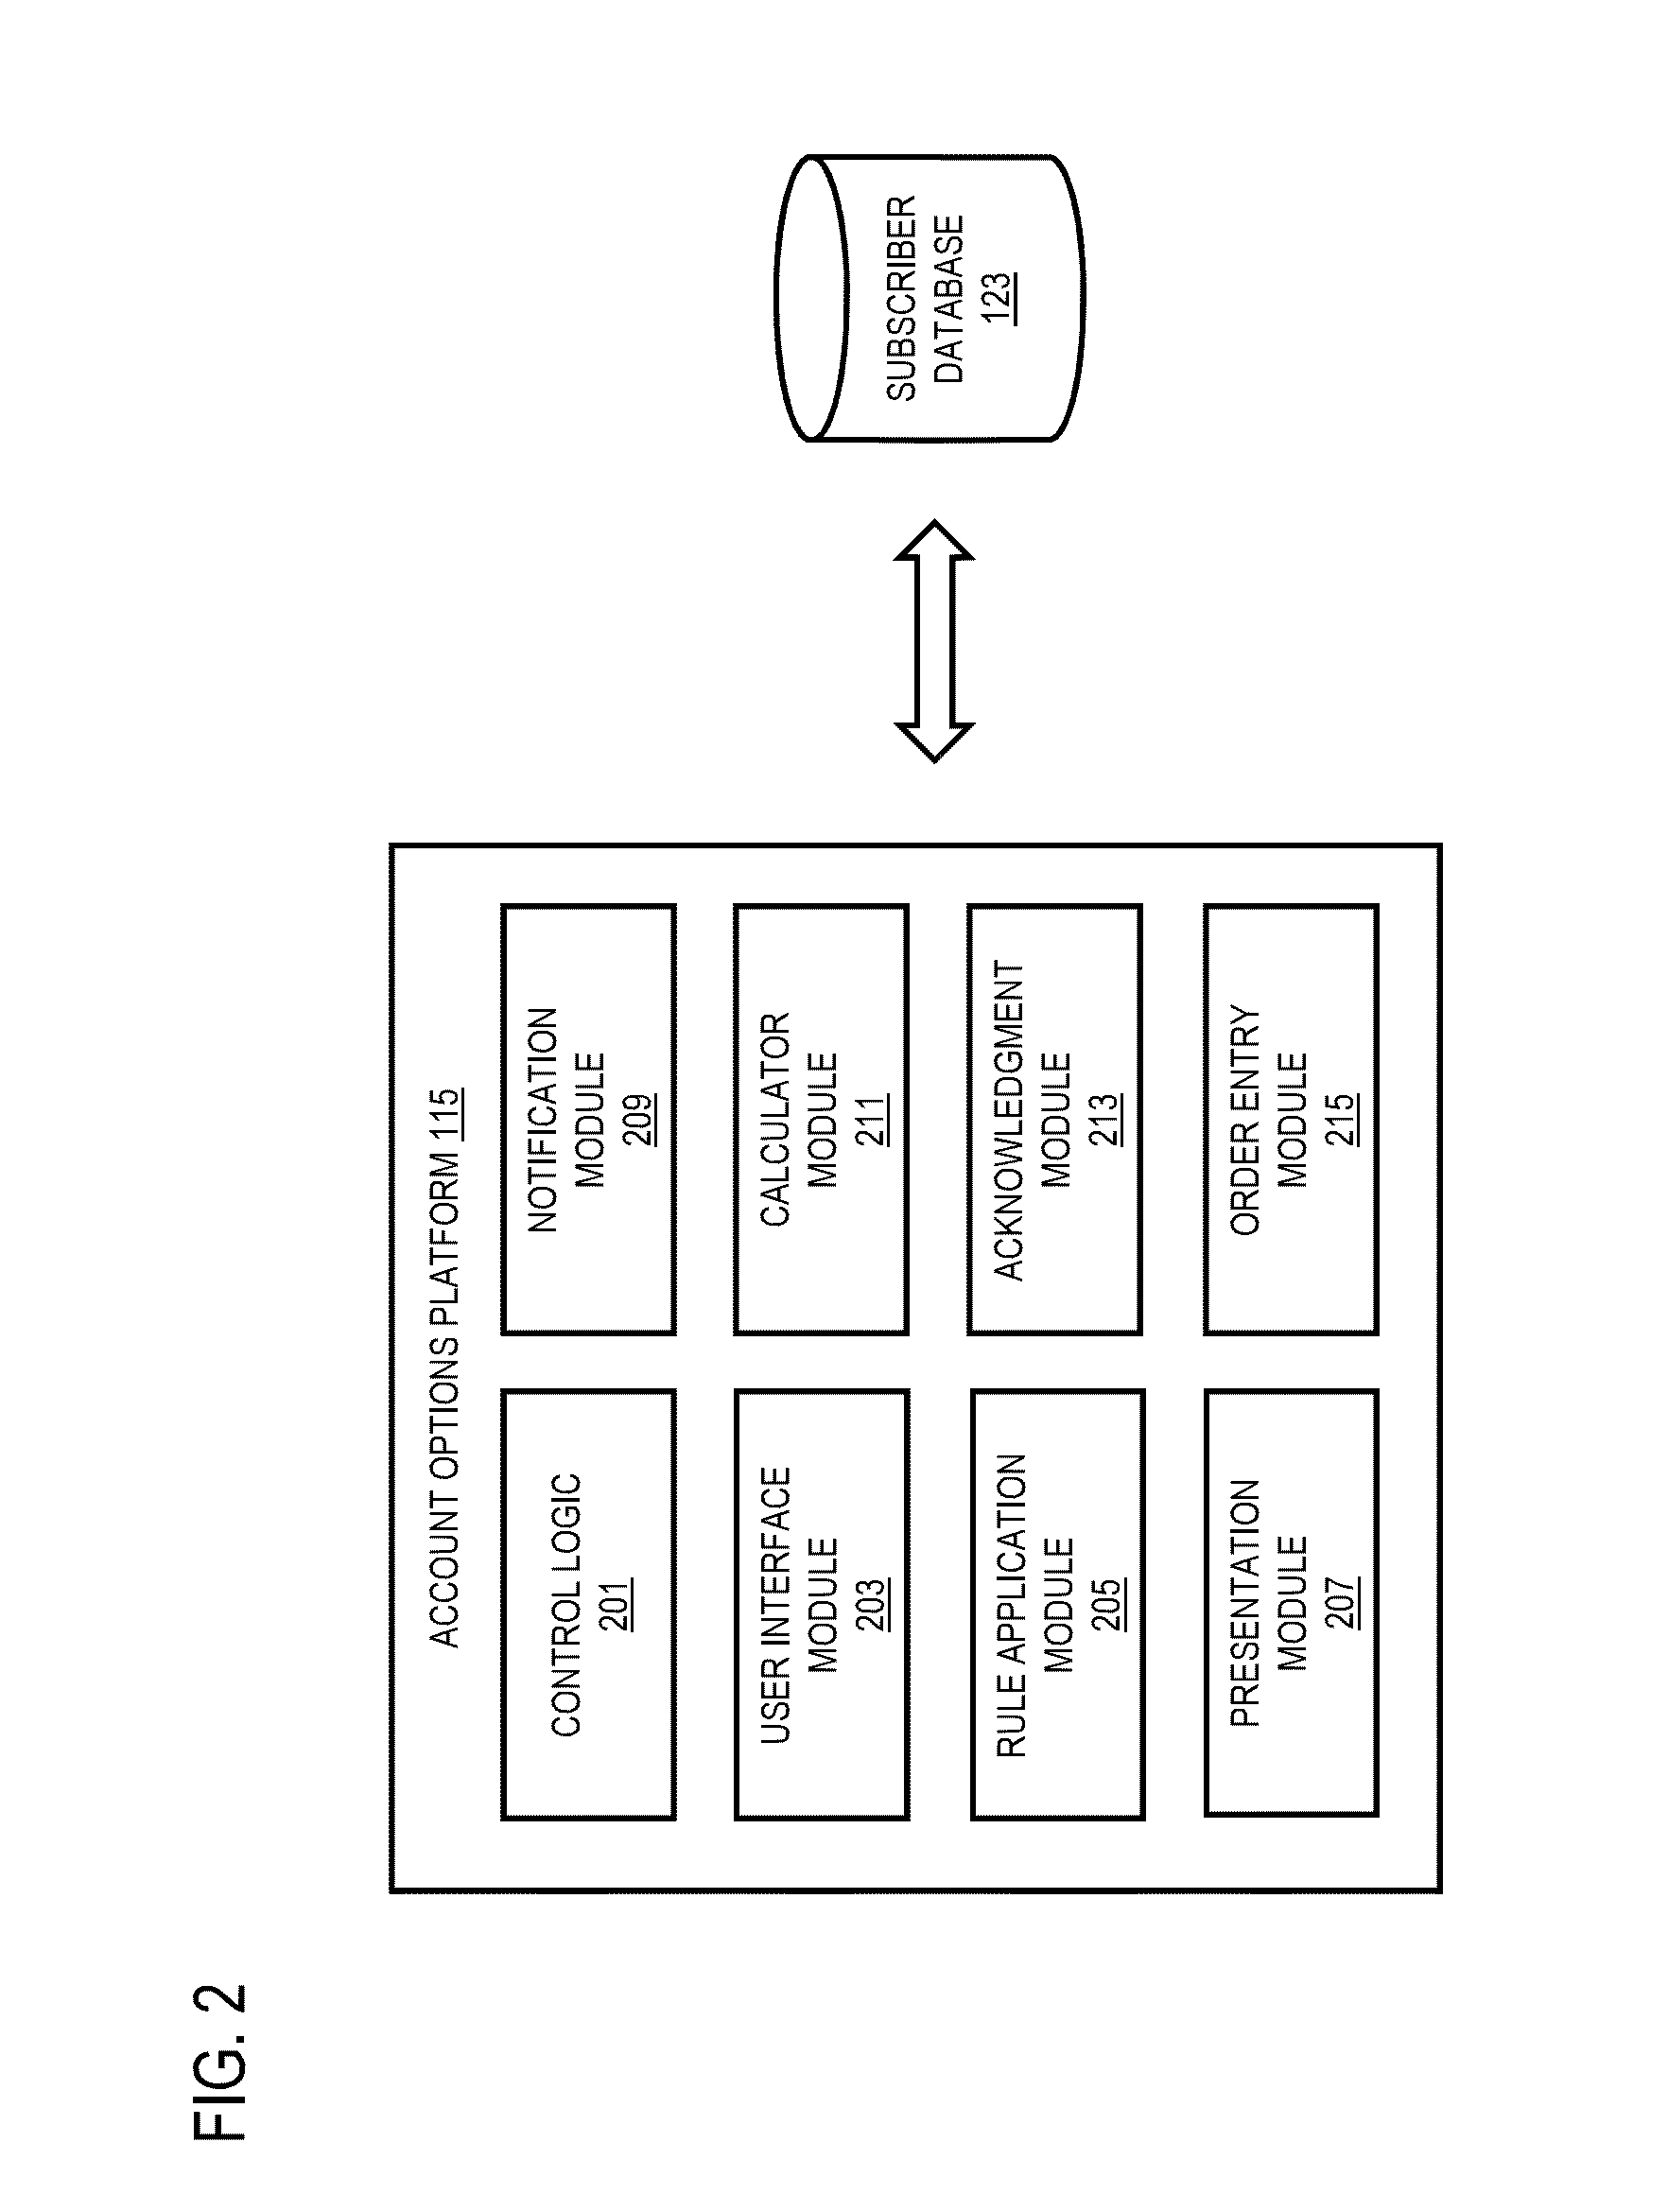 Method and apparatus for managing account options